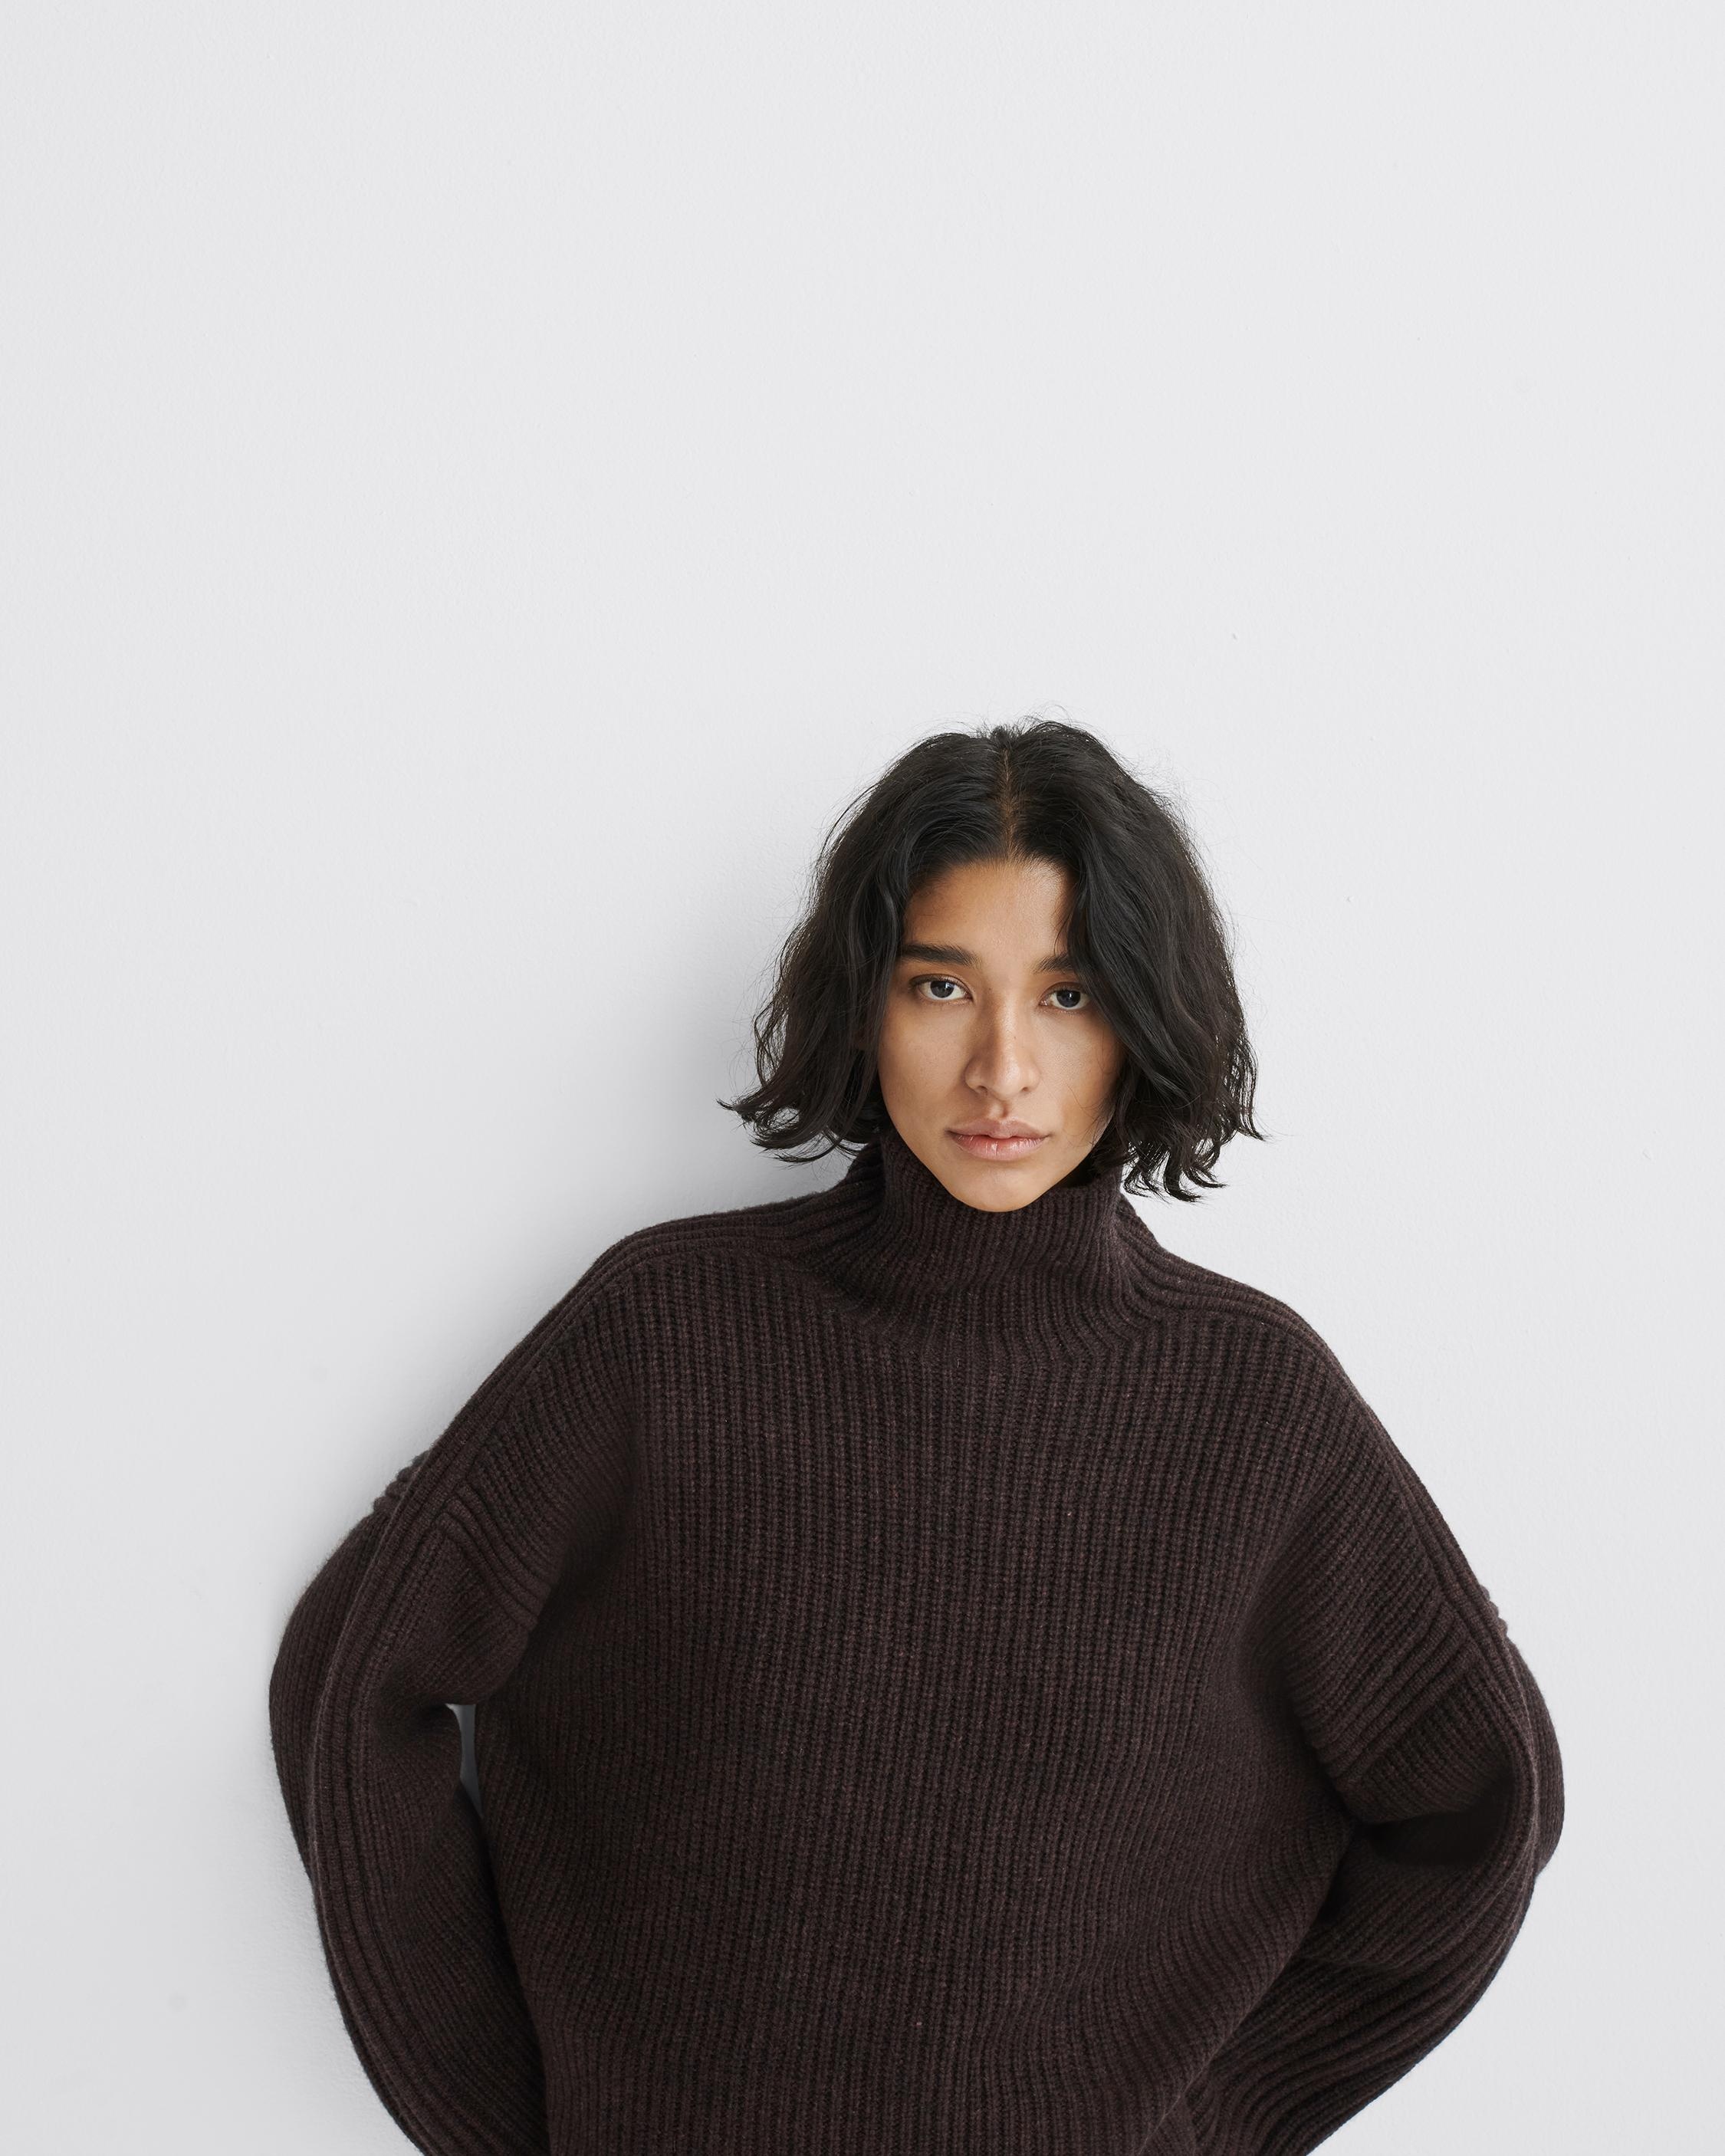 Connie Wool Turtleneck
Oversized Fit - 2